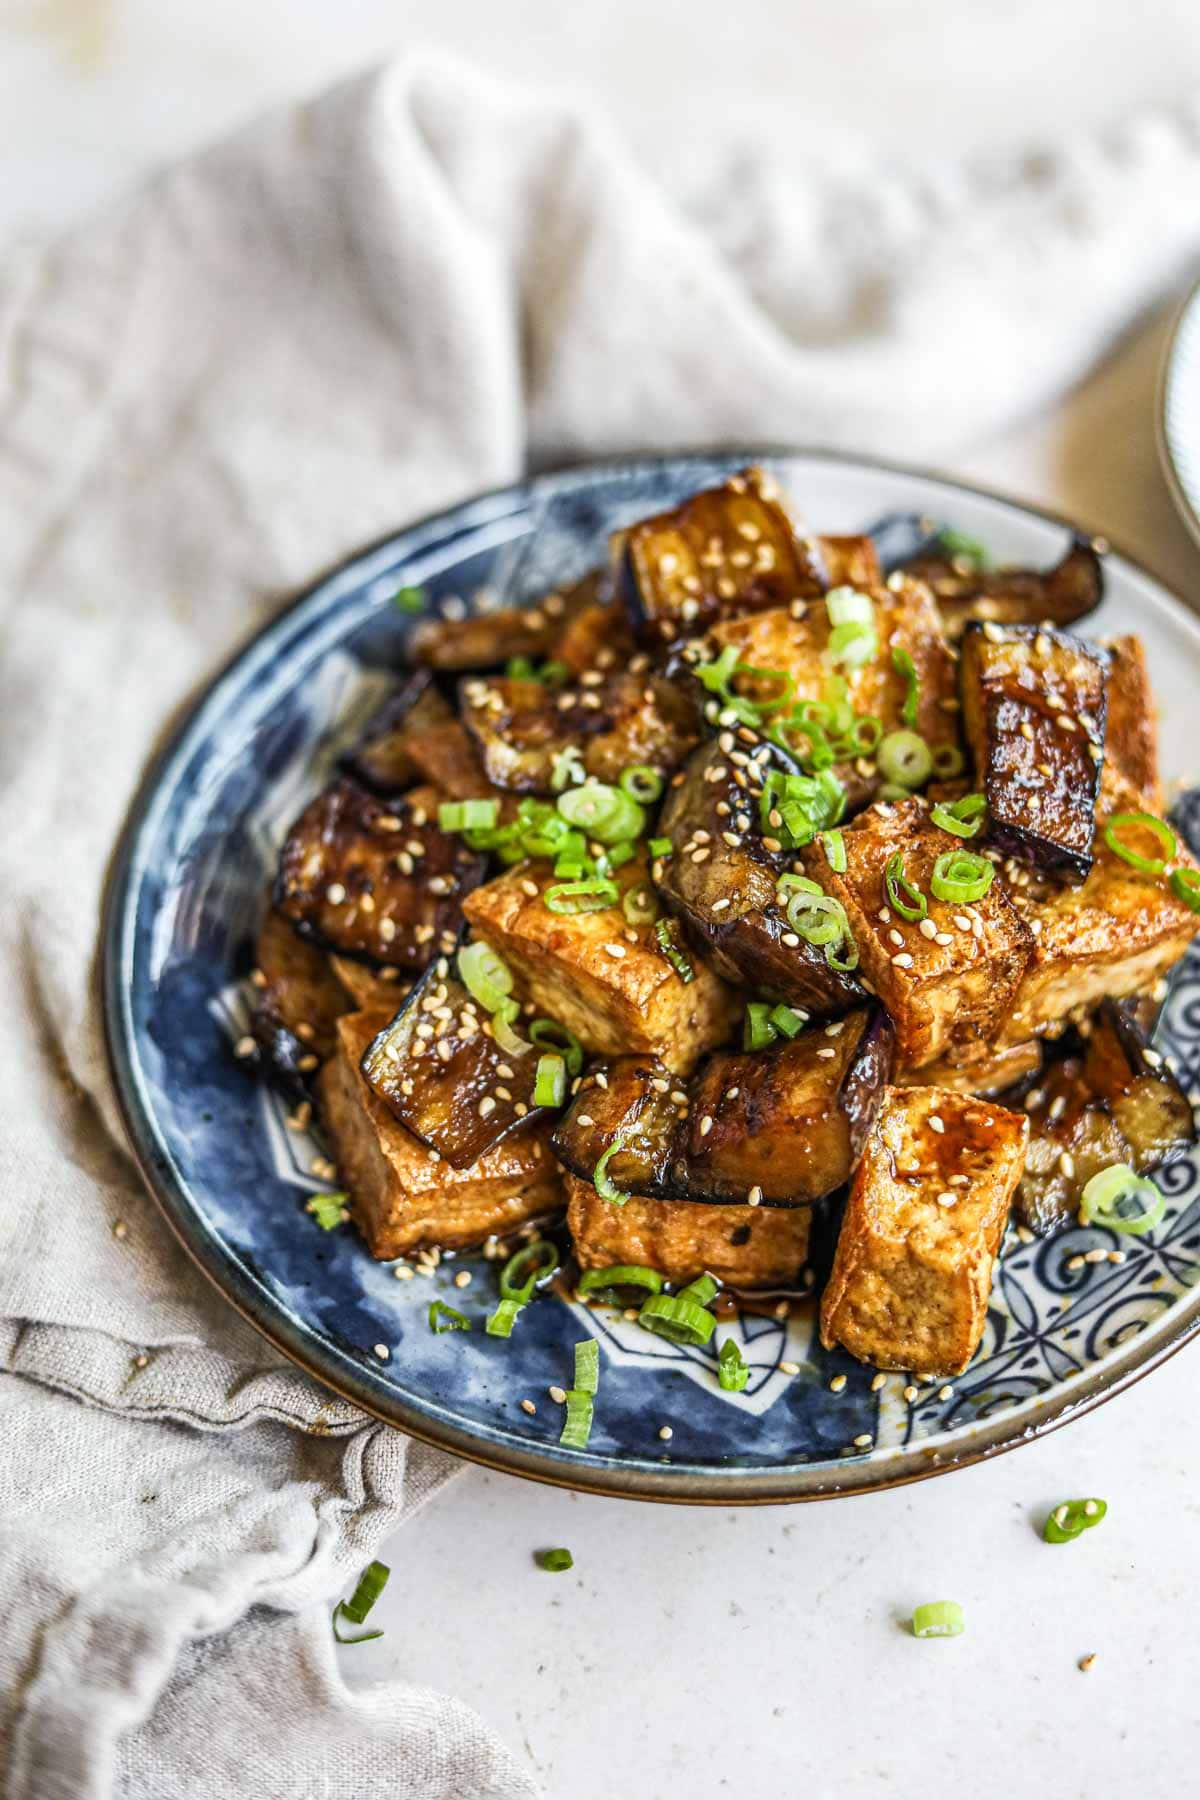 Teriyaki fried tofu and Japanese eggplant in a homemade gluten-free honey teriyaki sauce topped with sliced green onions and sesame seeds on a blue plate.